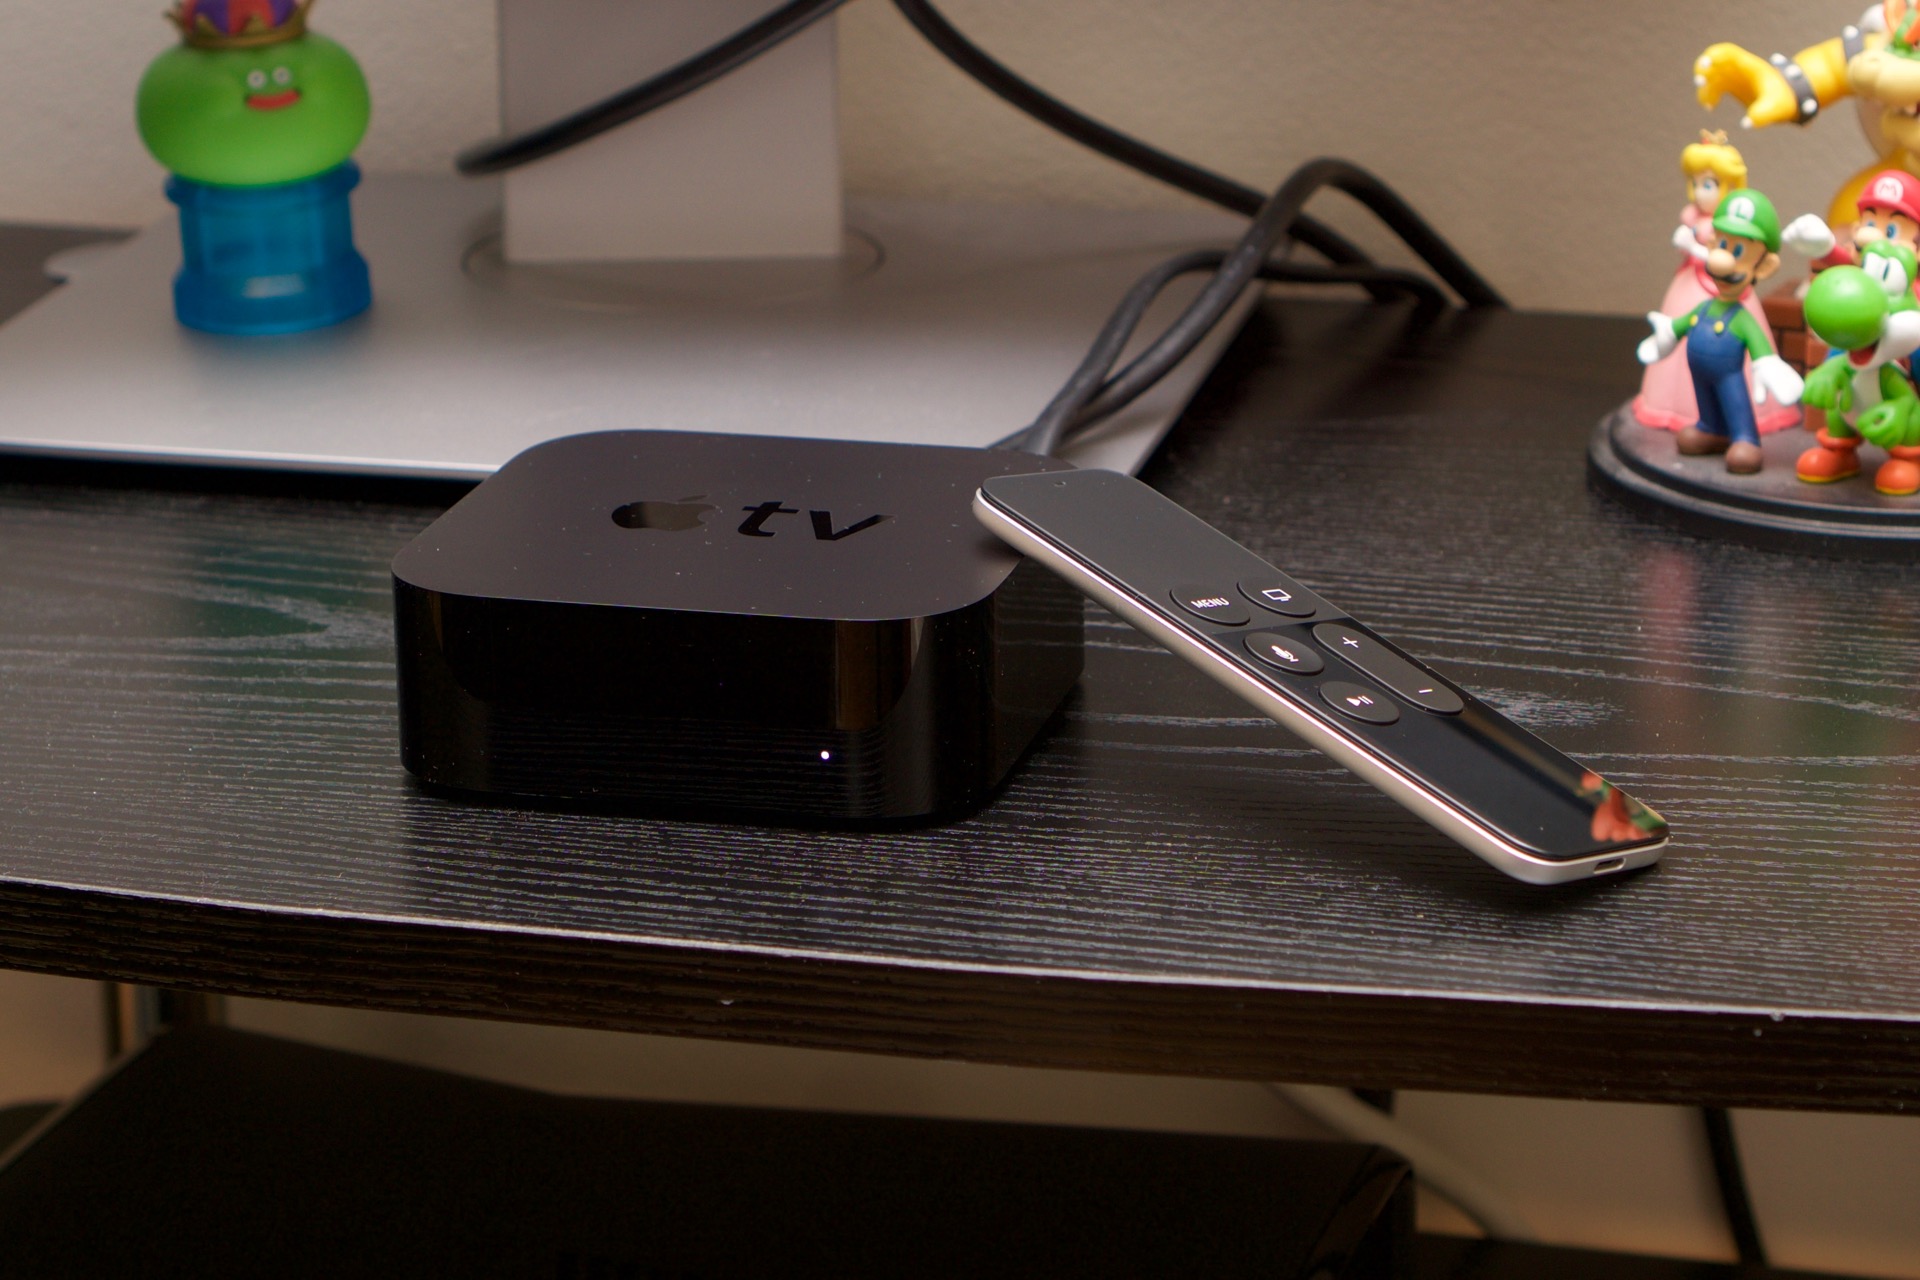 Apple TV 4K review: A slightly better box with a greatly improved remote